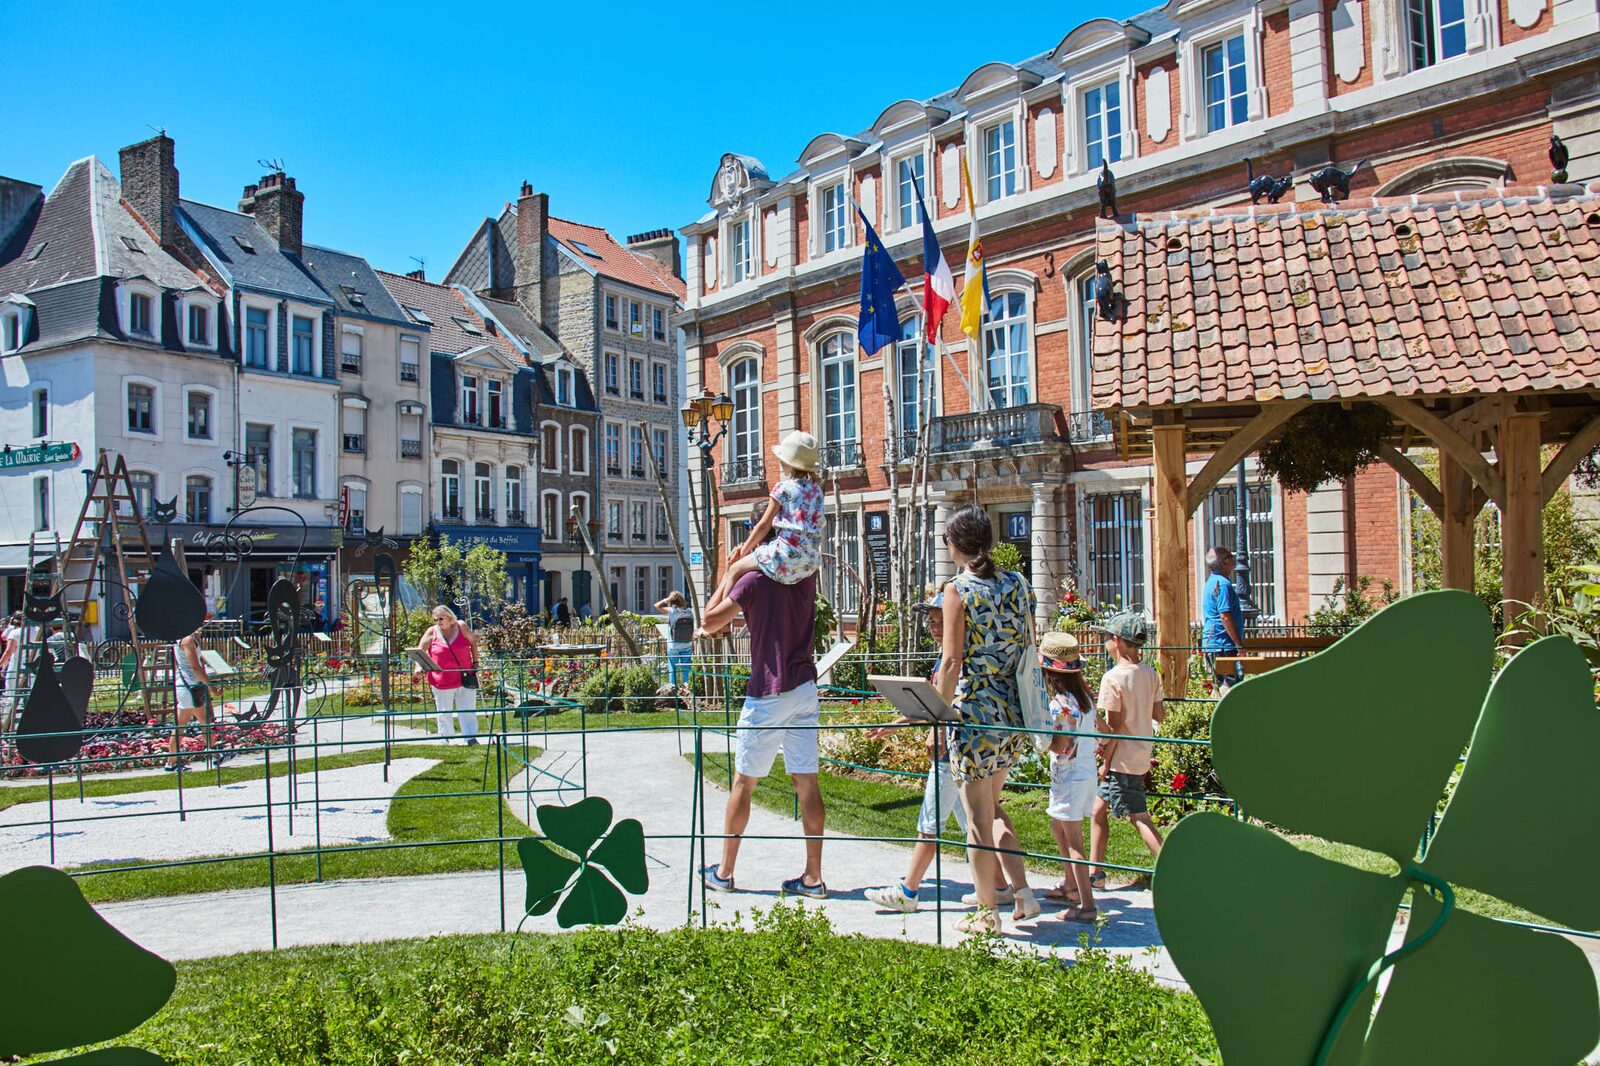 What to do in Boulogne-Sur-Mer according to our 3 experts?